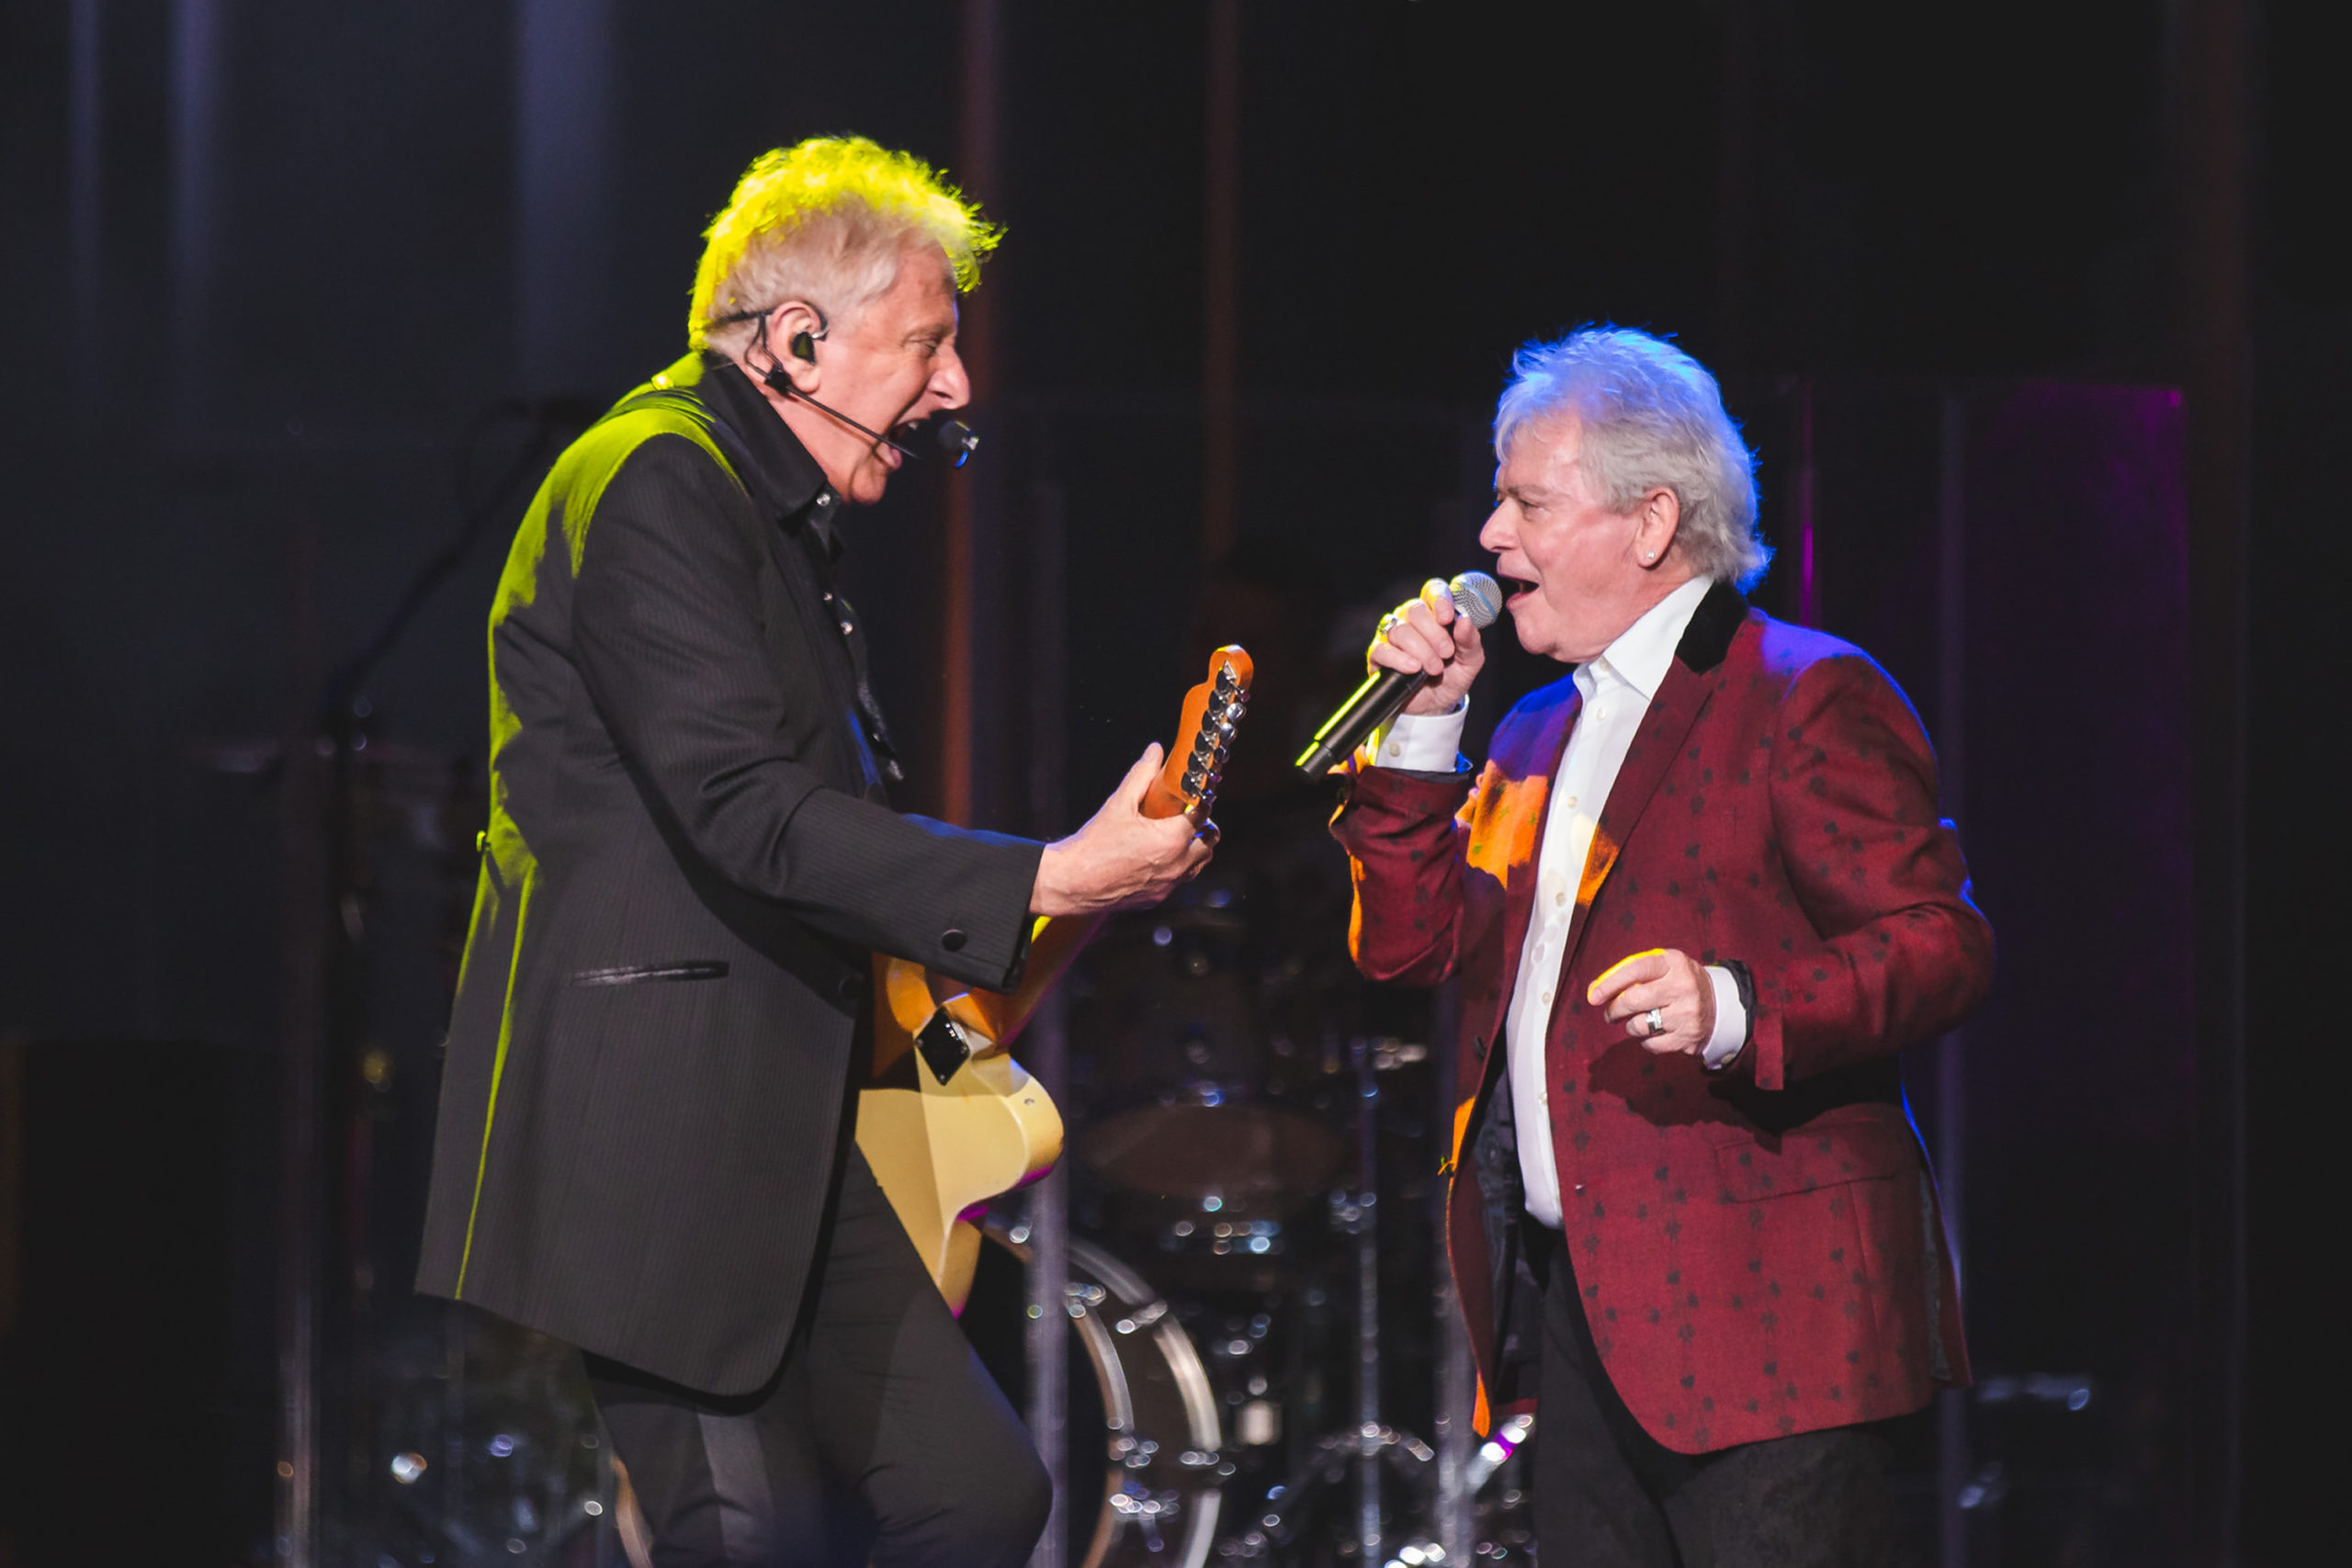 air supply performing live